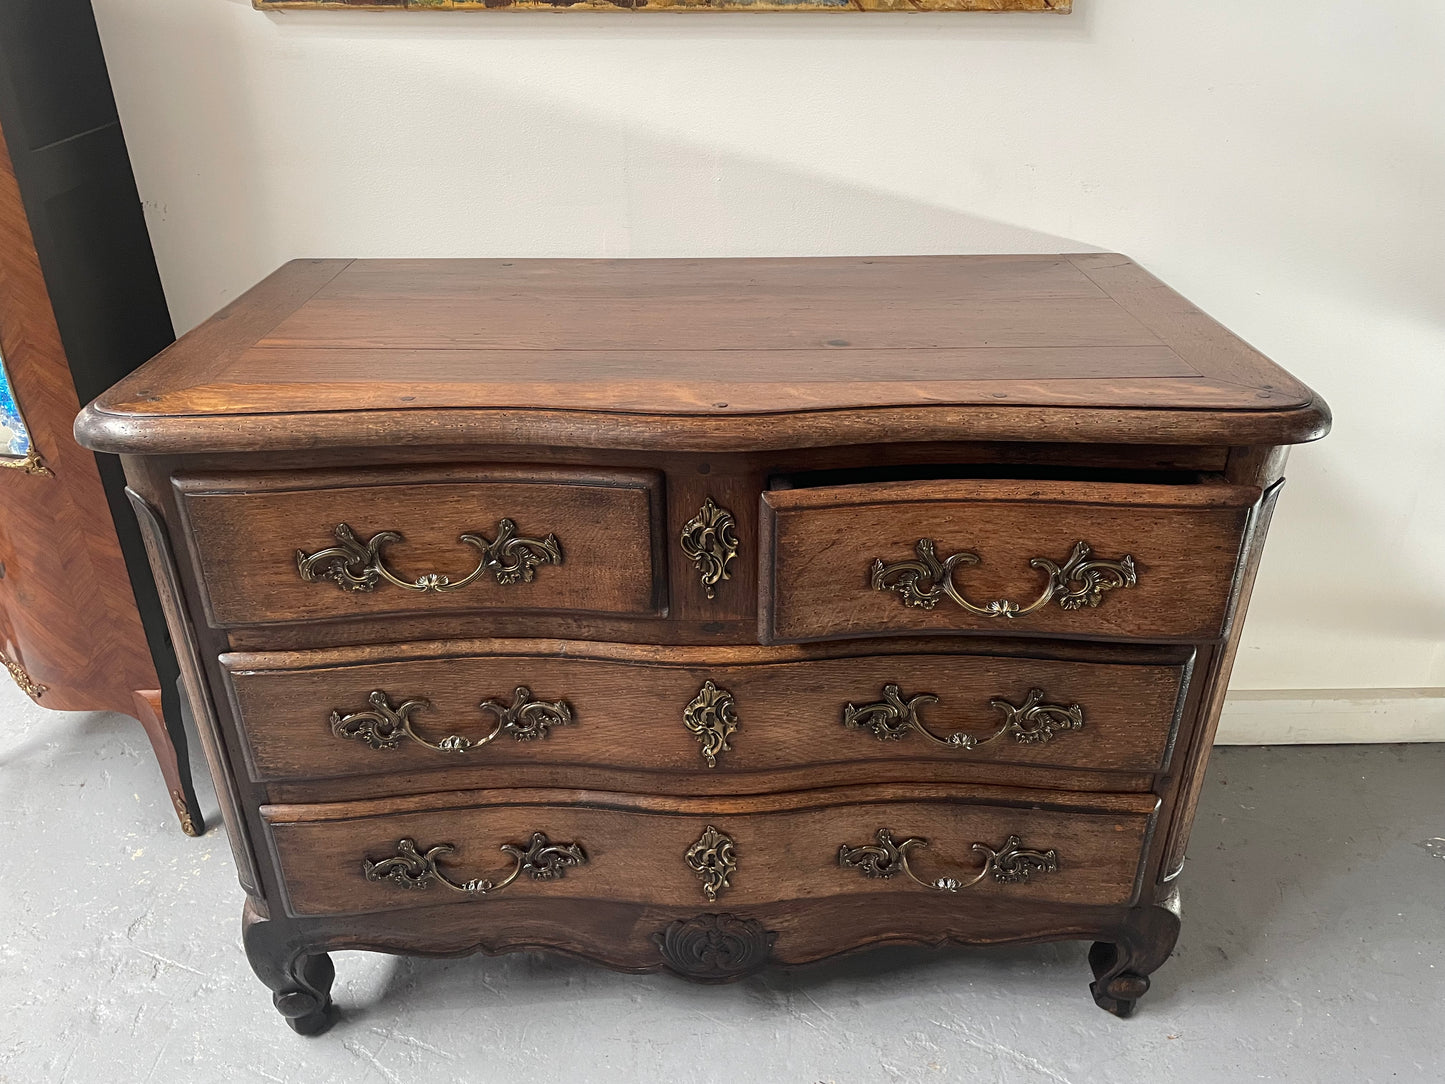 French Provincial Oak Chest of Drawers